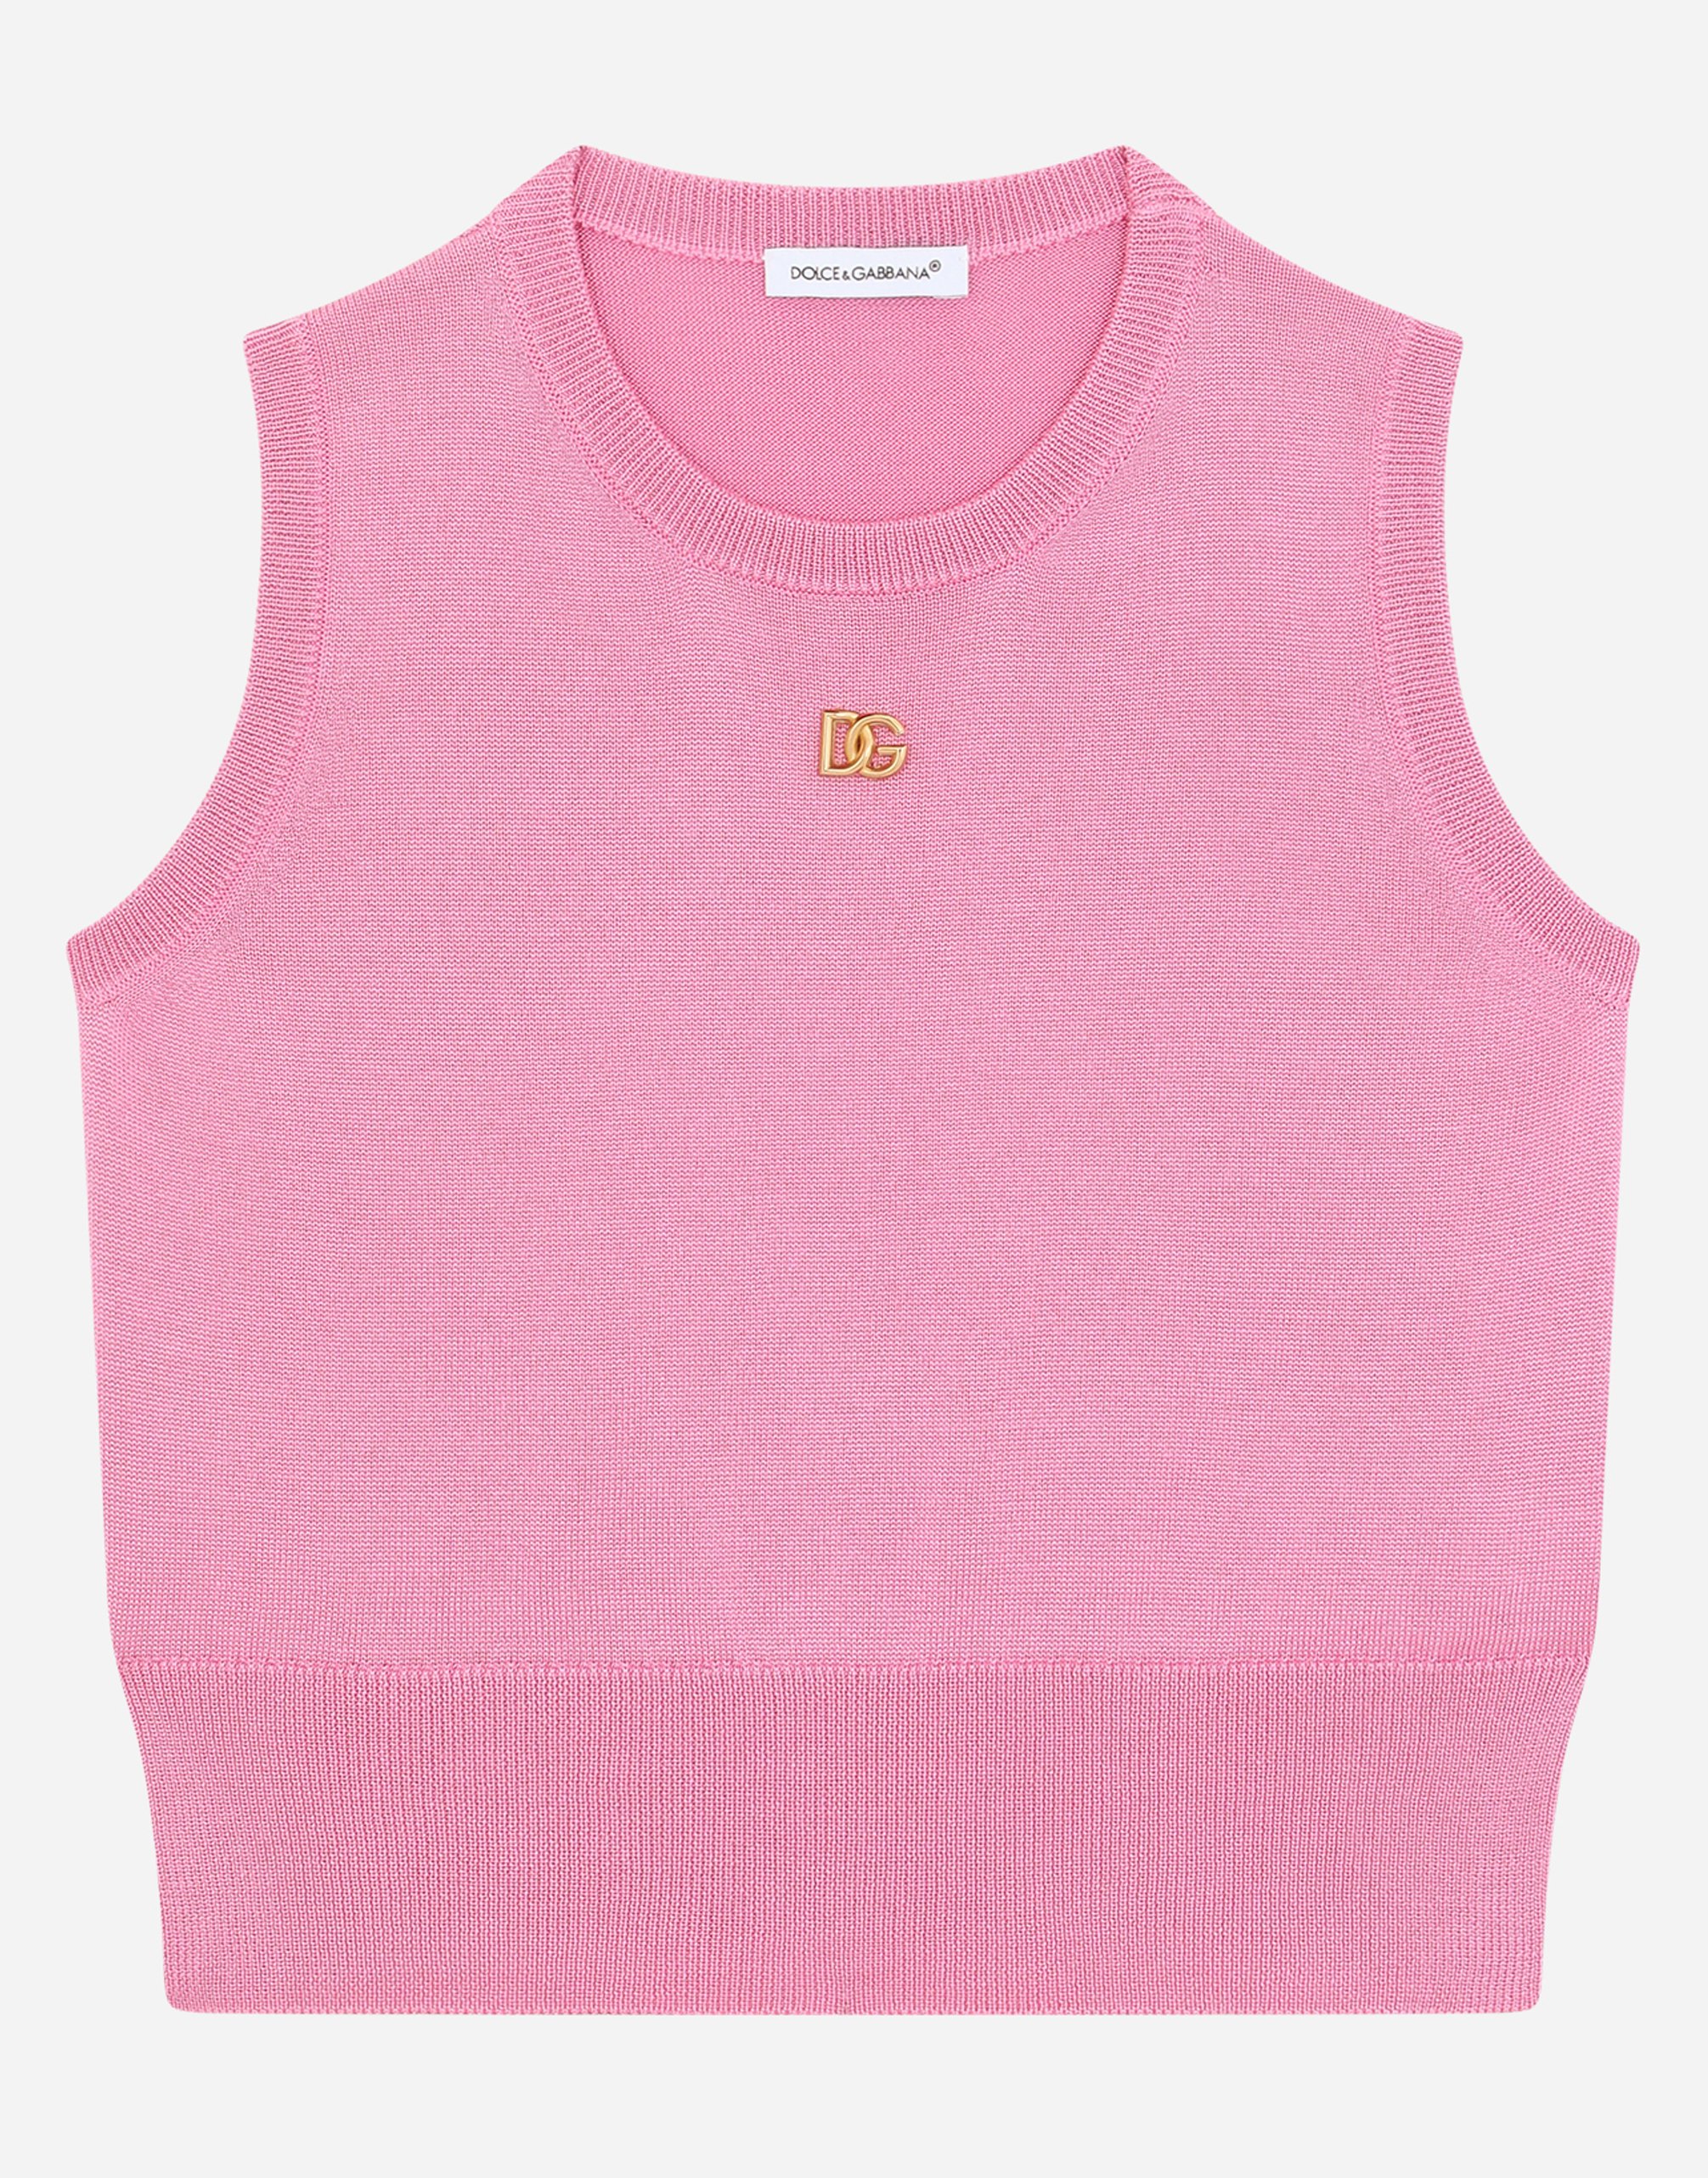 Silk vest with DG logo embroidery in Pink